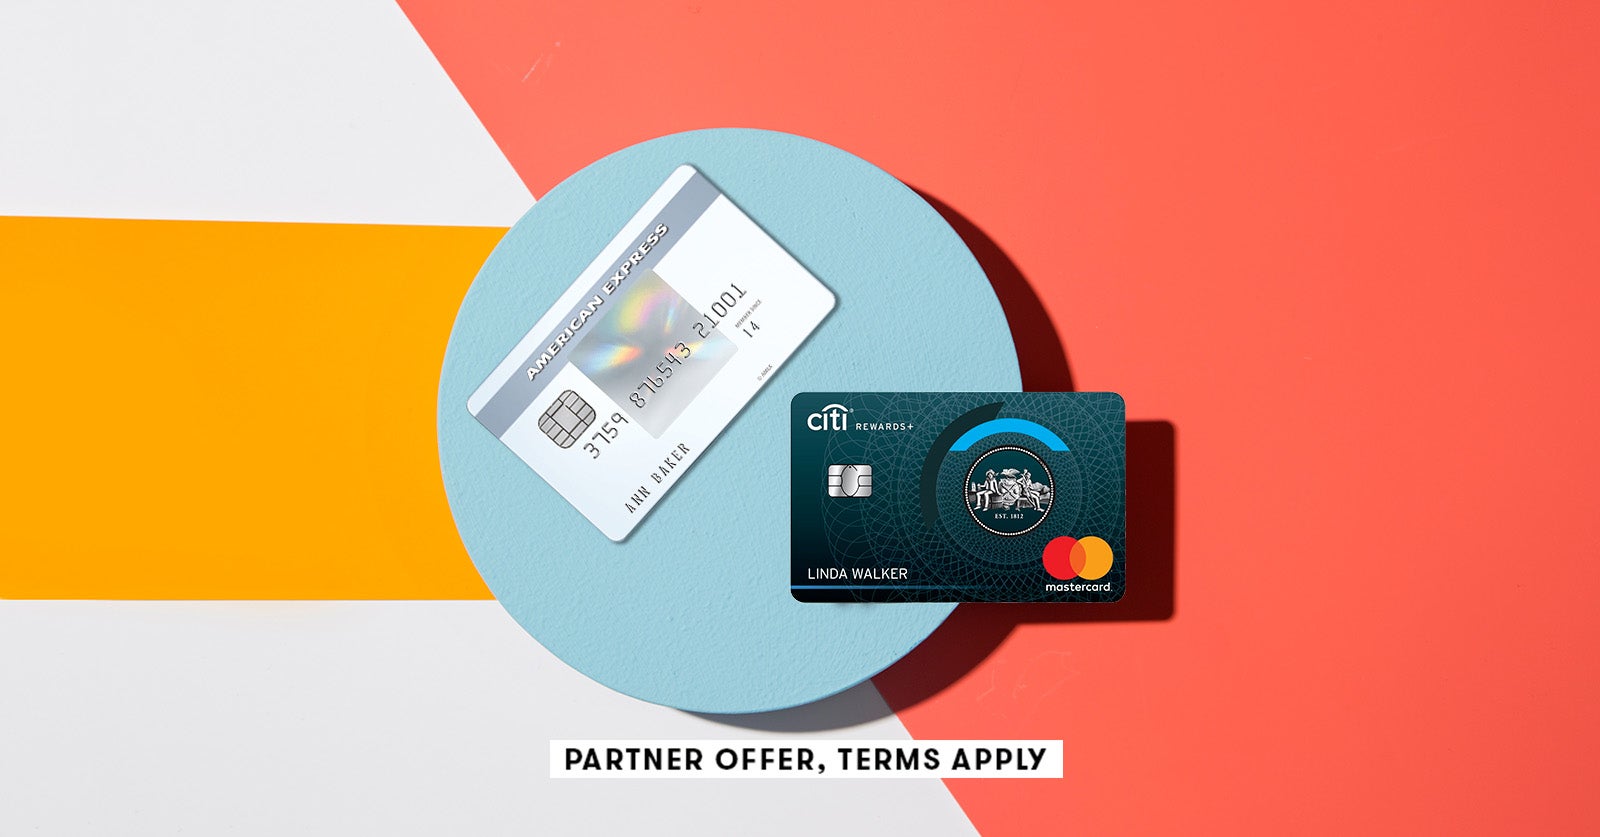 Amex Everyday Vs Citi Rewards Plus Which Card Should You Get